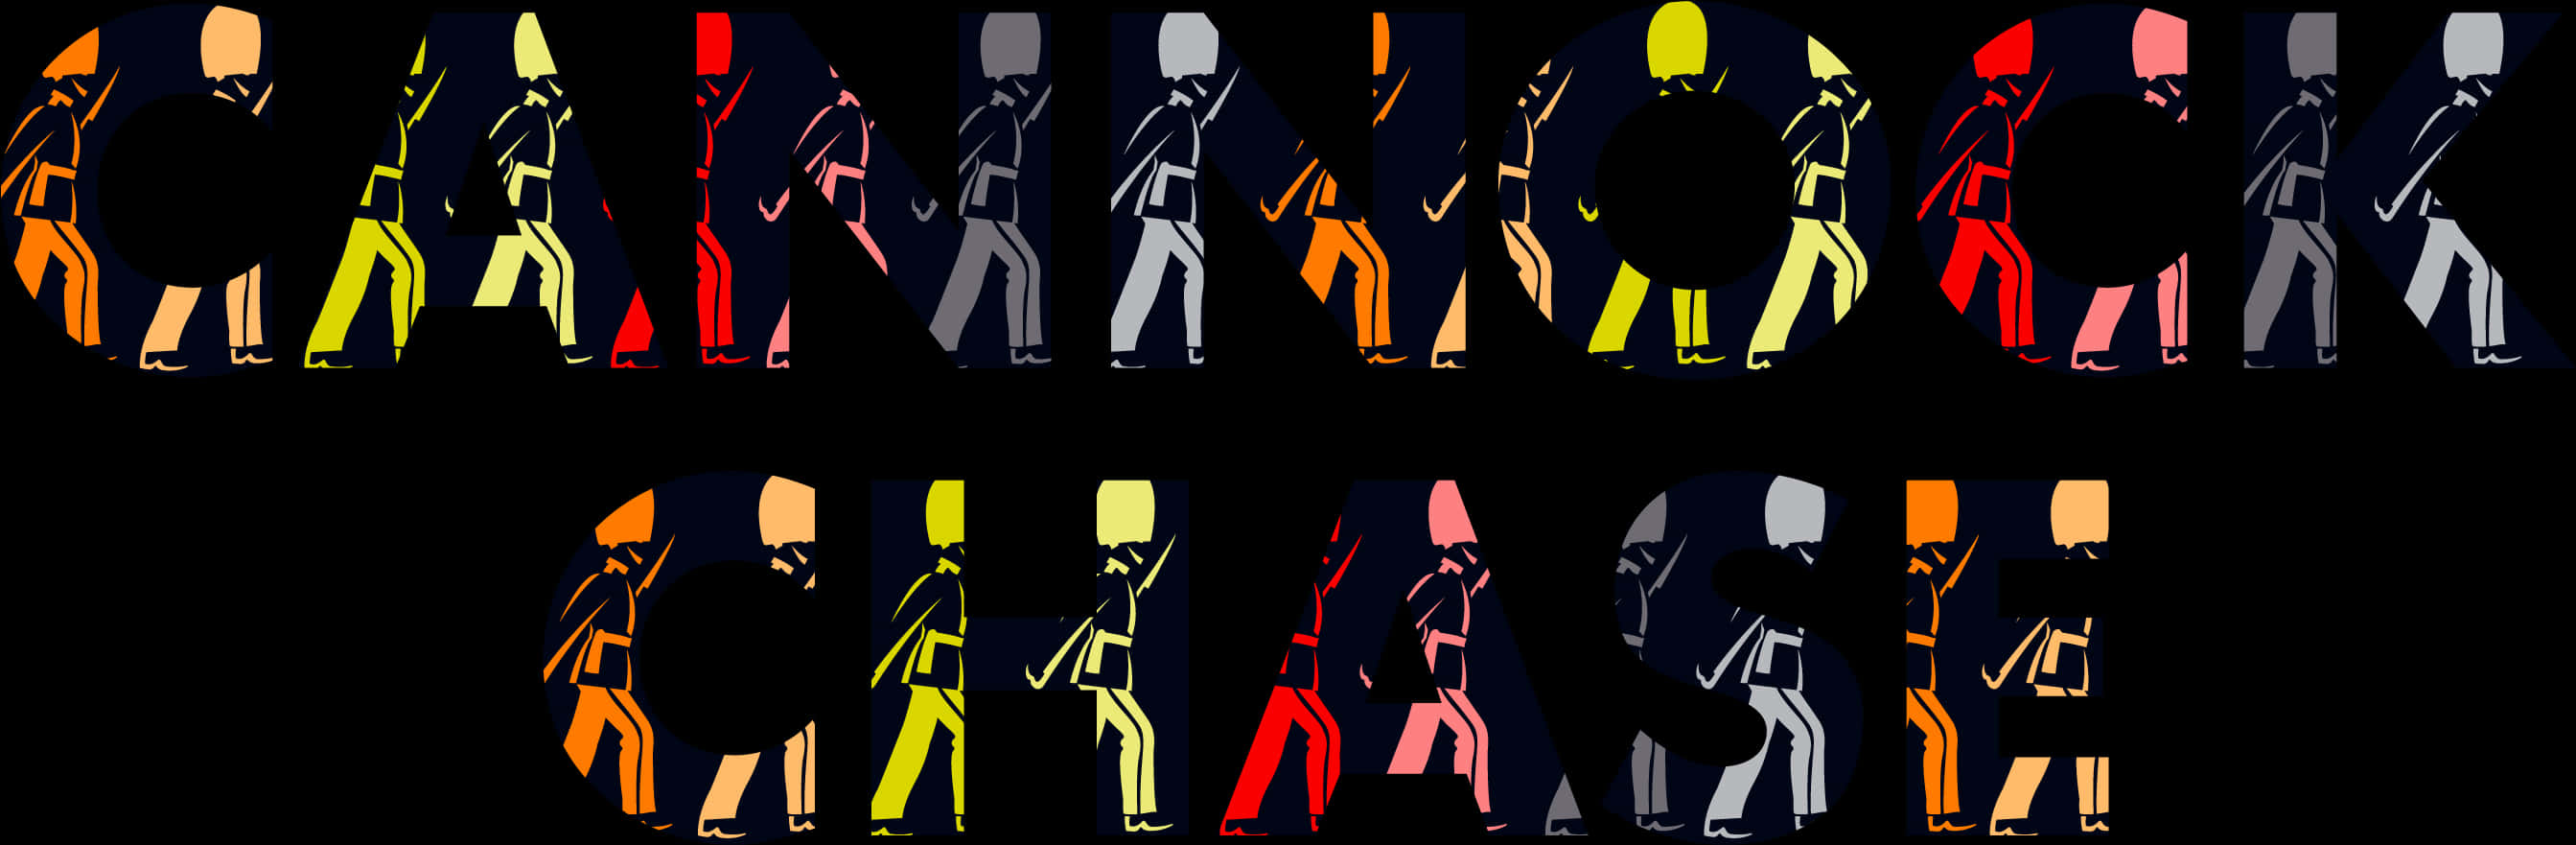 Colorful Silhouettes Chase Logo PNG image